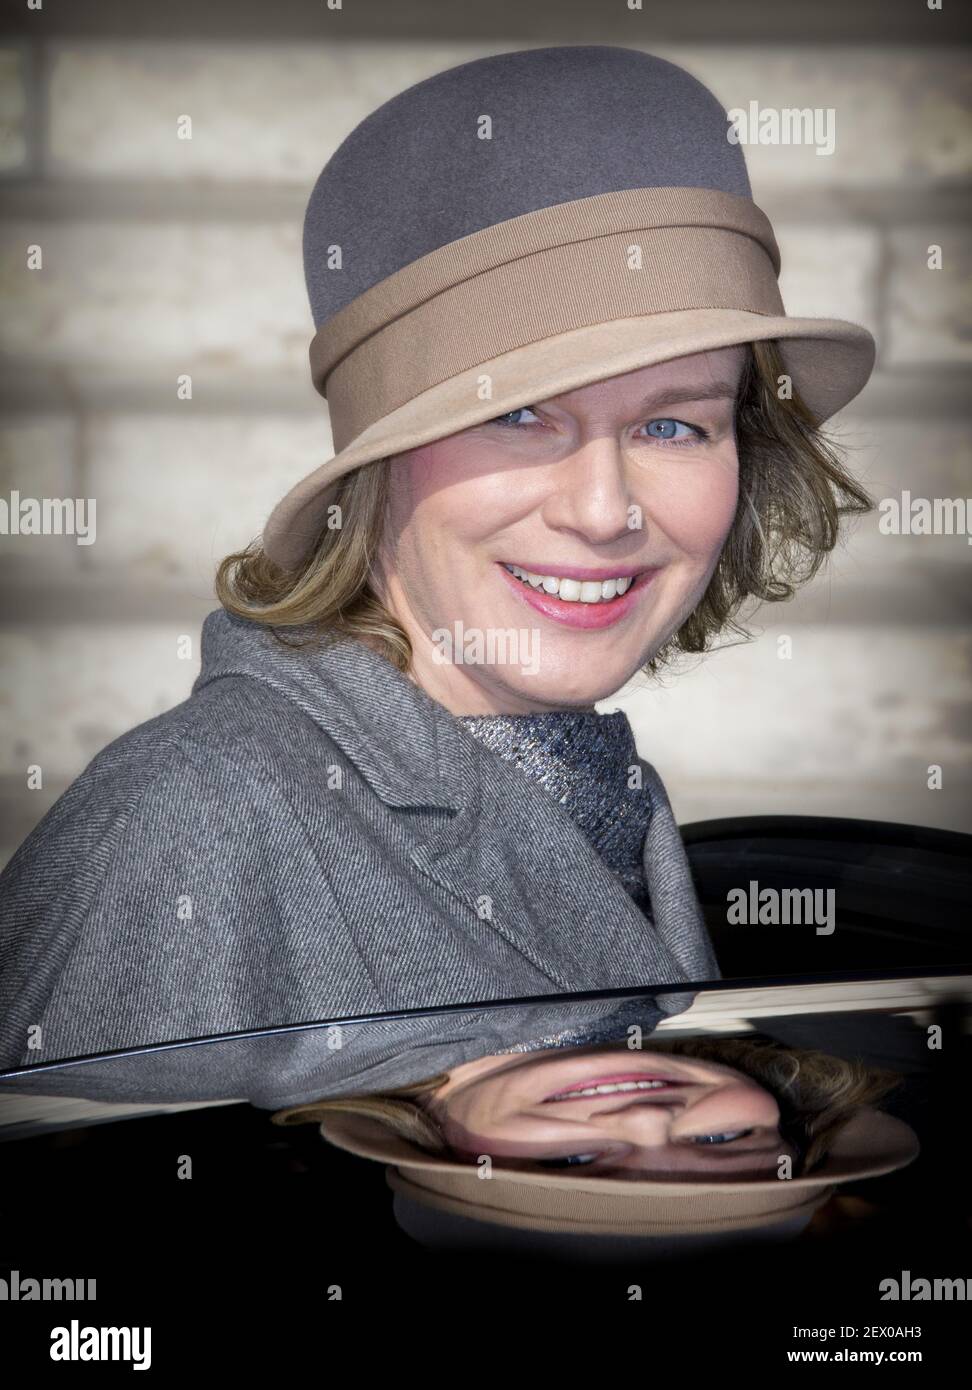 Queen Mathilde attend the annual celebration of the Eucharist in memory of the deceased members the Royal Family. The Mass will take place at the Our Lady Church in Laken. Feb. 12, 2015 *** Please Use Credit from Credit Field *** Stock Photo